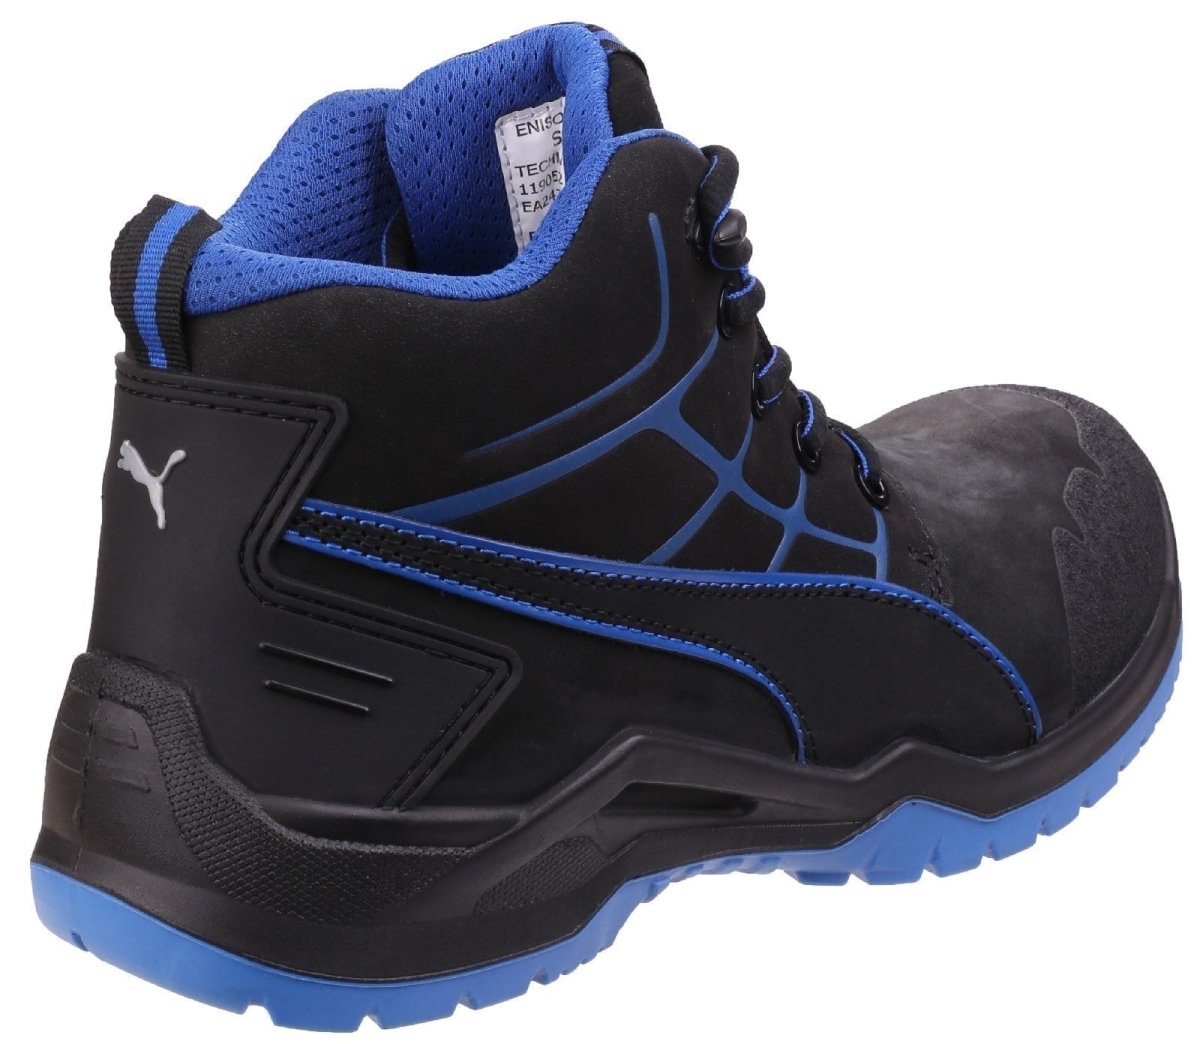 Puma Safety Krypton Lace Up Safety Boots - Shoe Store Direct